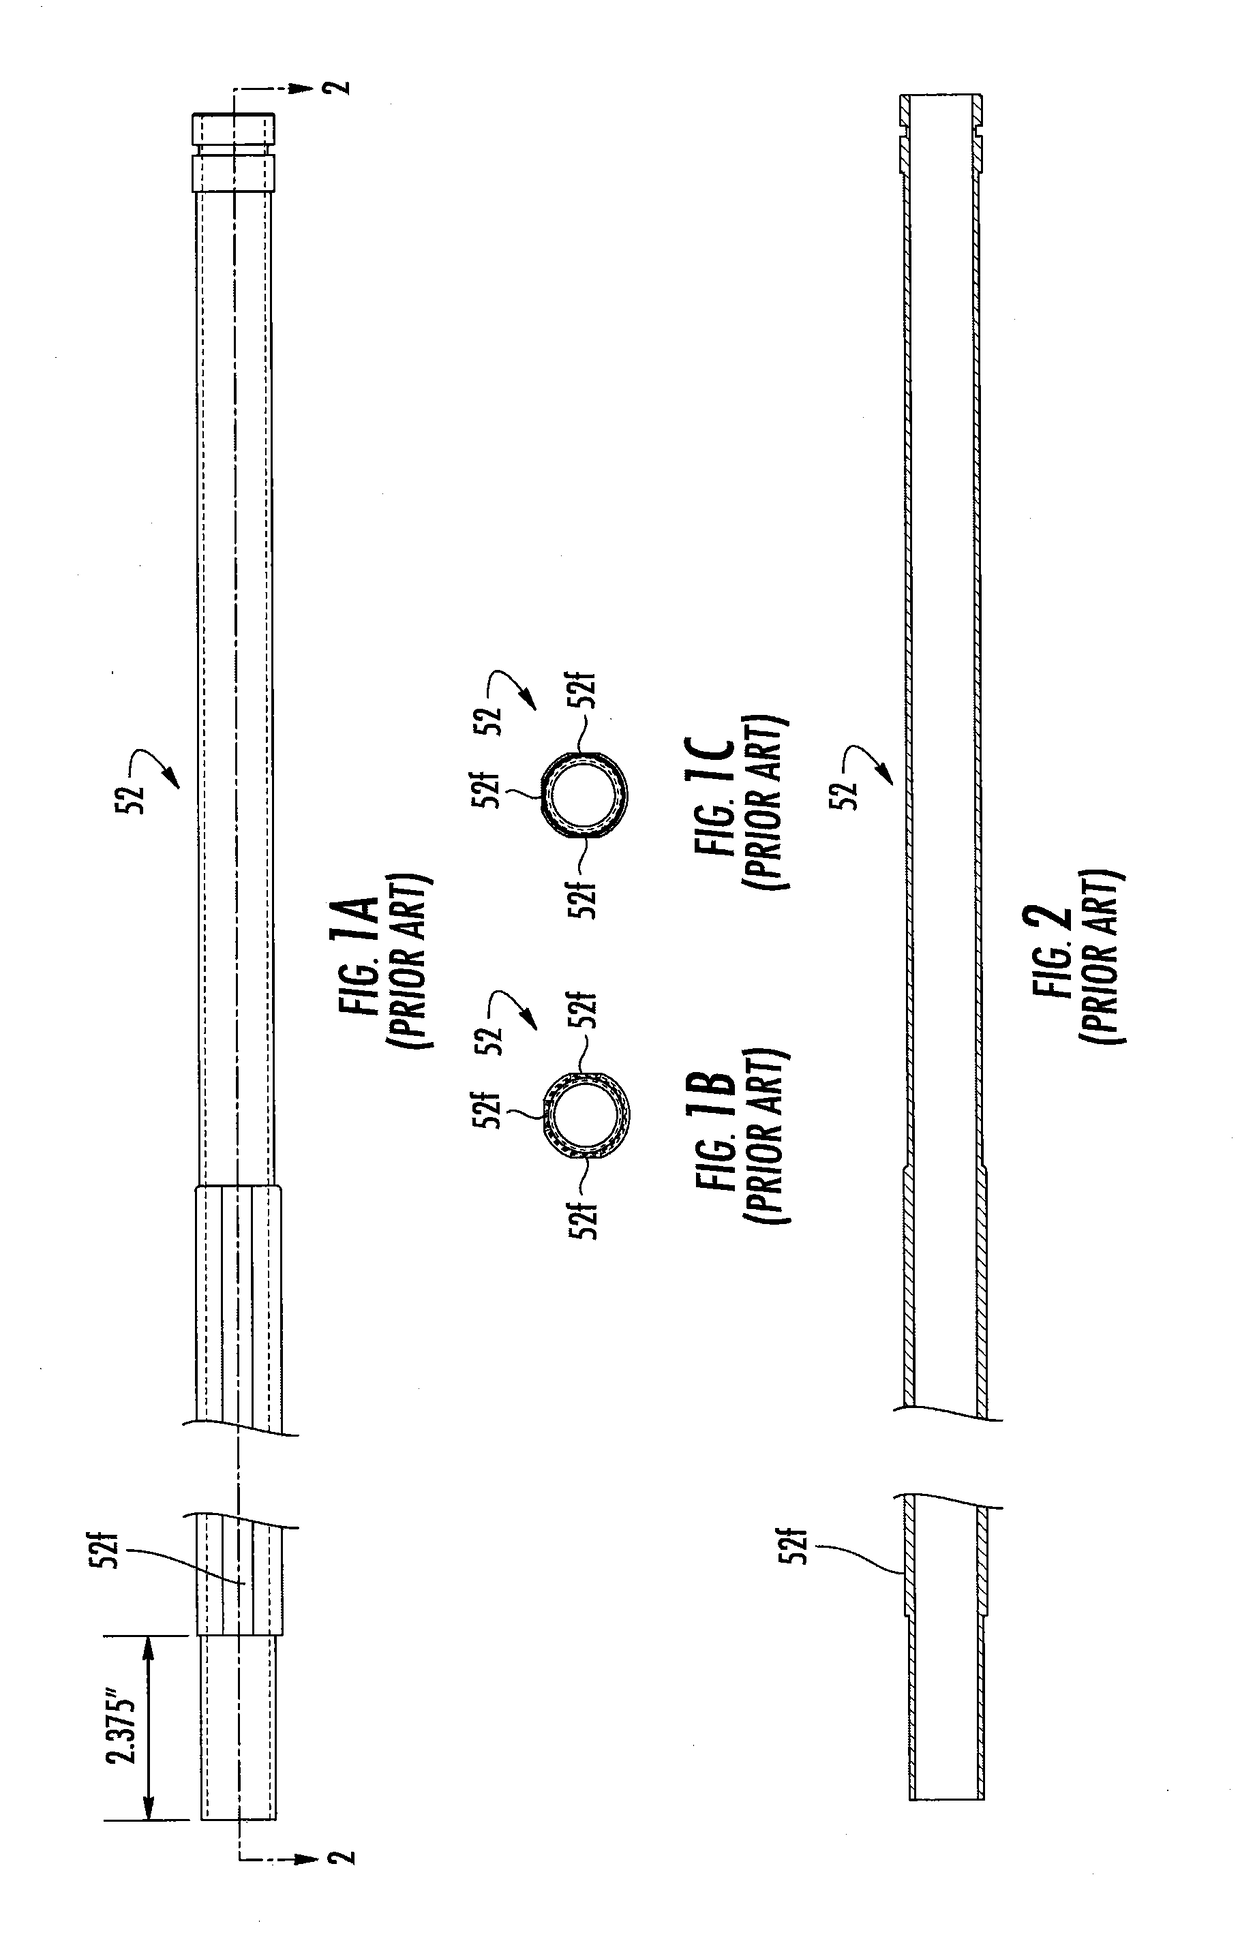 Packaging systems with sizing mandrels and related devices that can operate at reduced pressures suitable for low temperature explosives emulsions